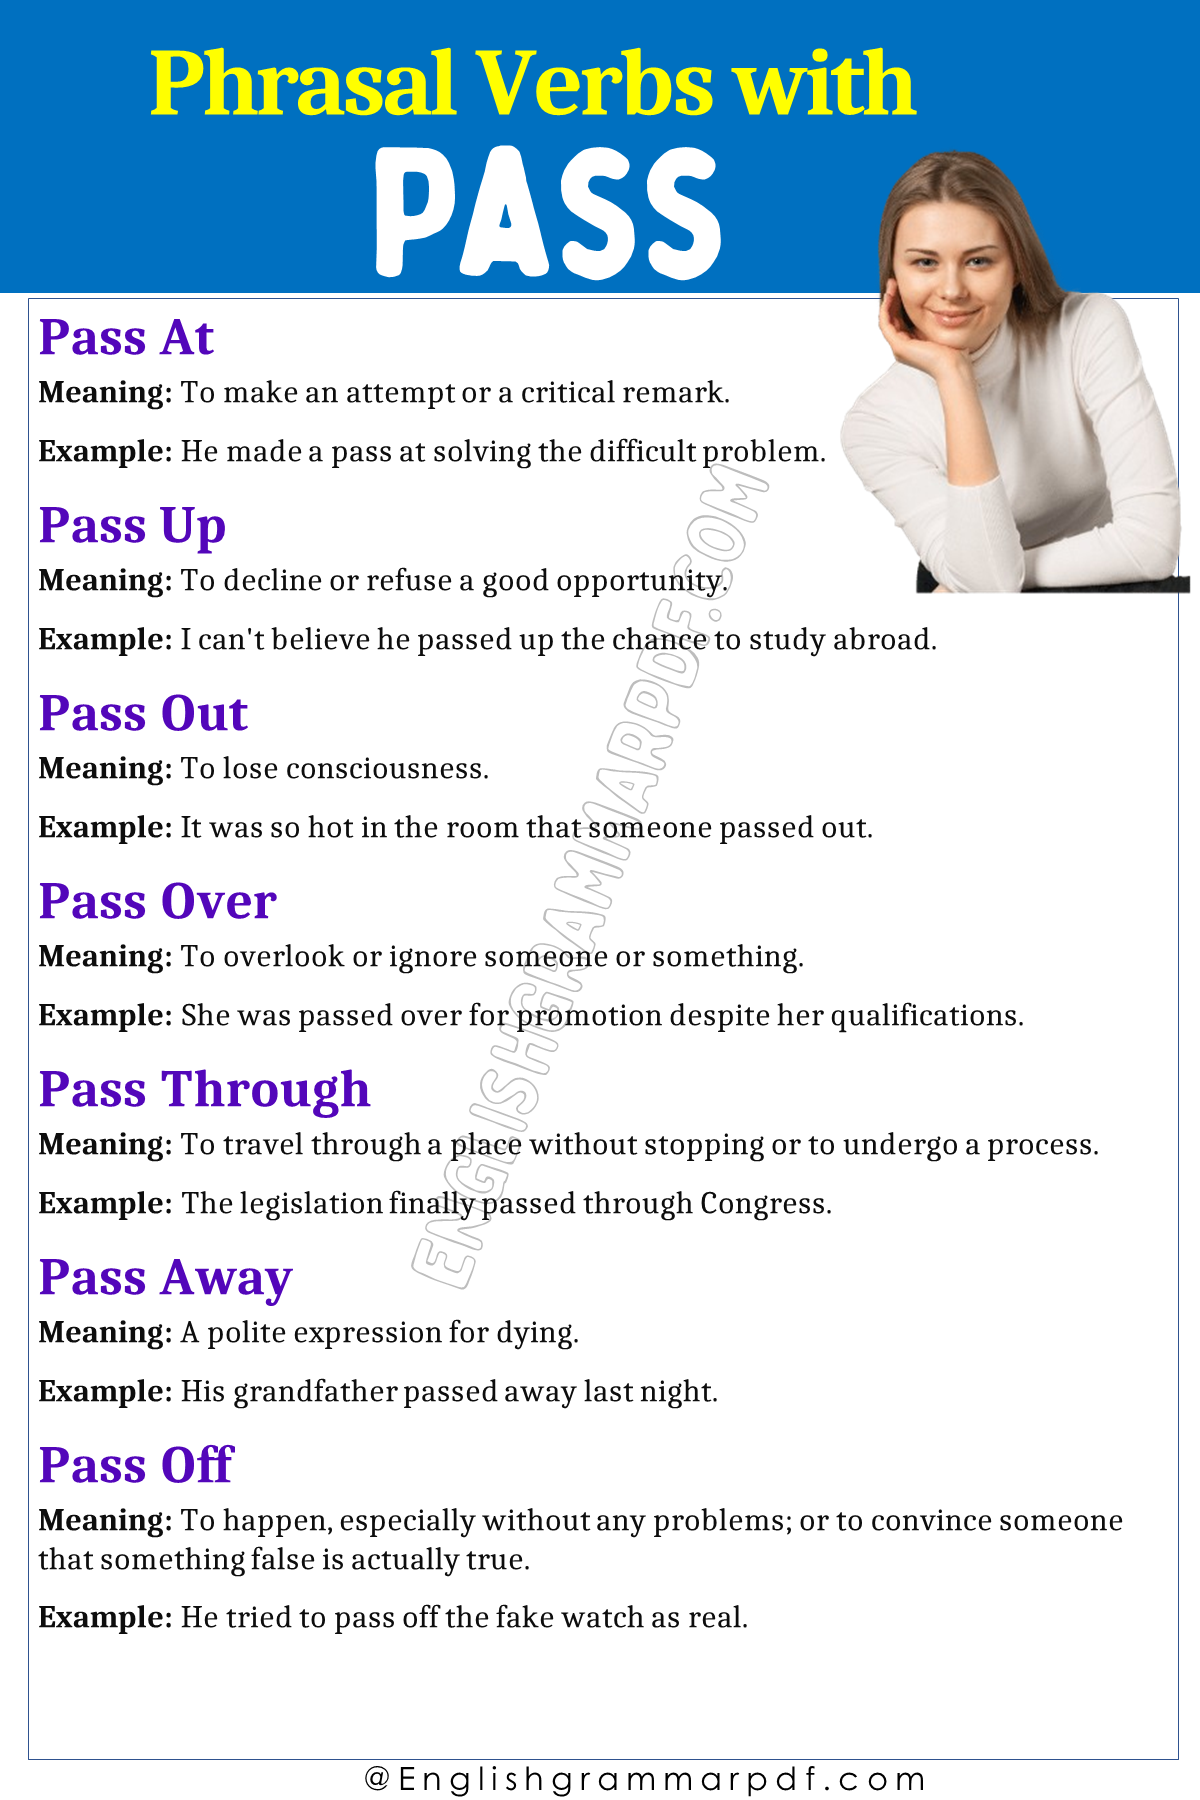 Phrasal Verbs with Pass